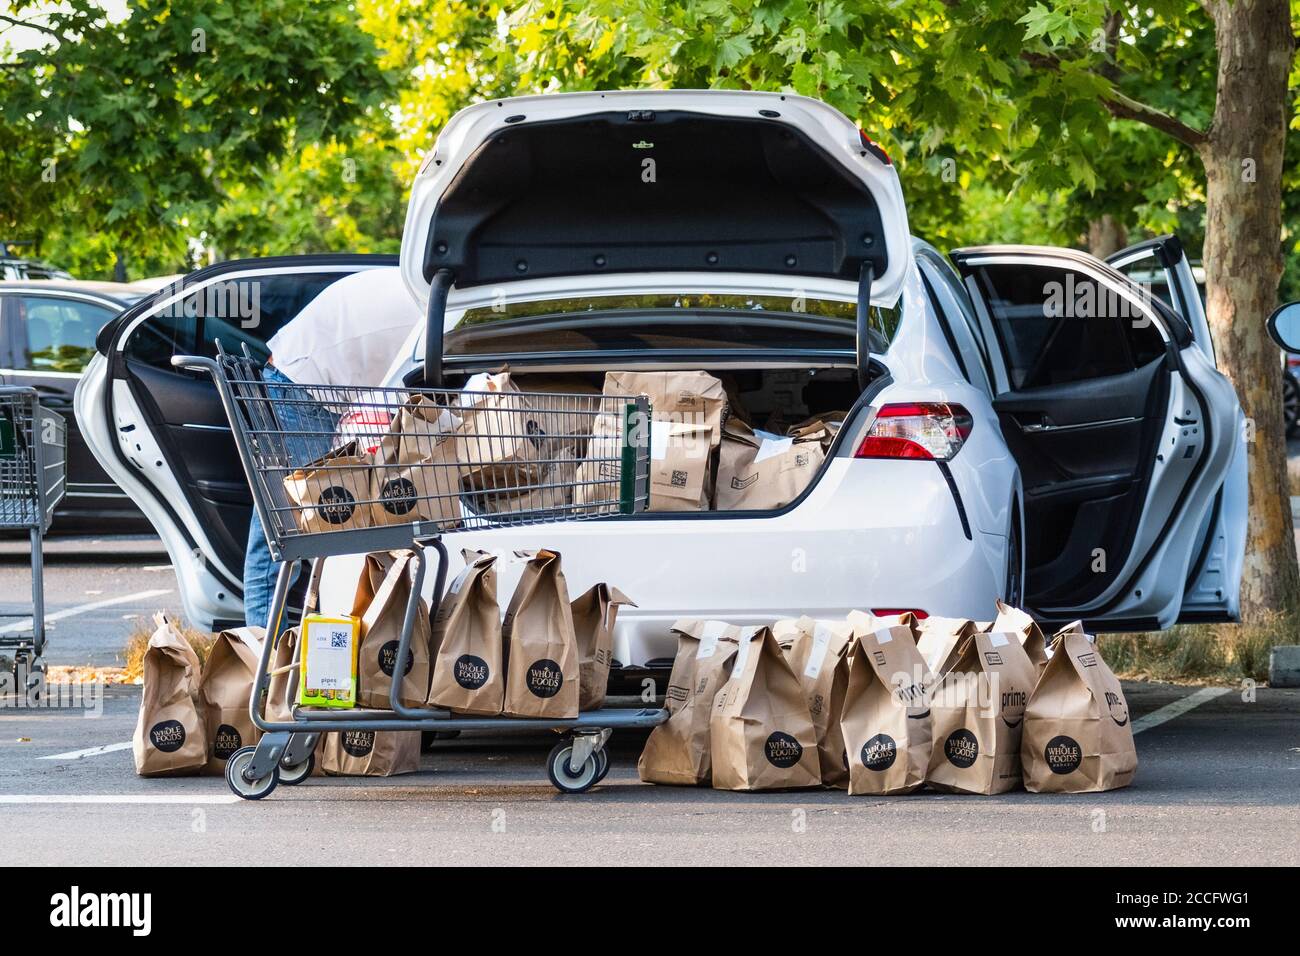 August 1, 2020 Cupertino / CA / USA - Vehicle loaded by an Amazon Prime delivery person with groceries ordered online from Whole Foods Market; The cor Stock Photo